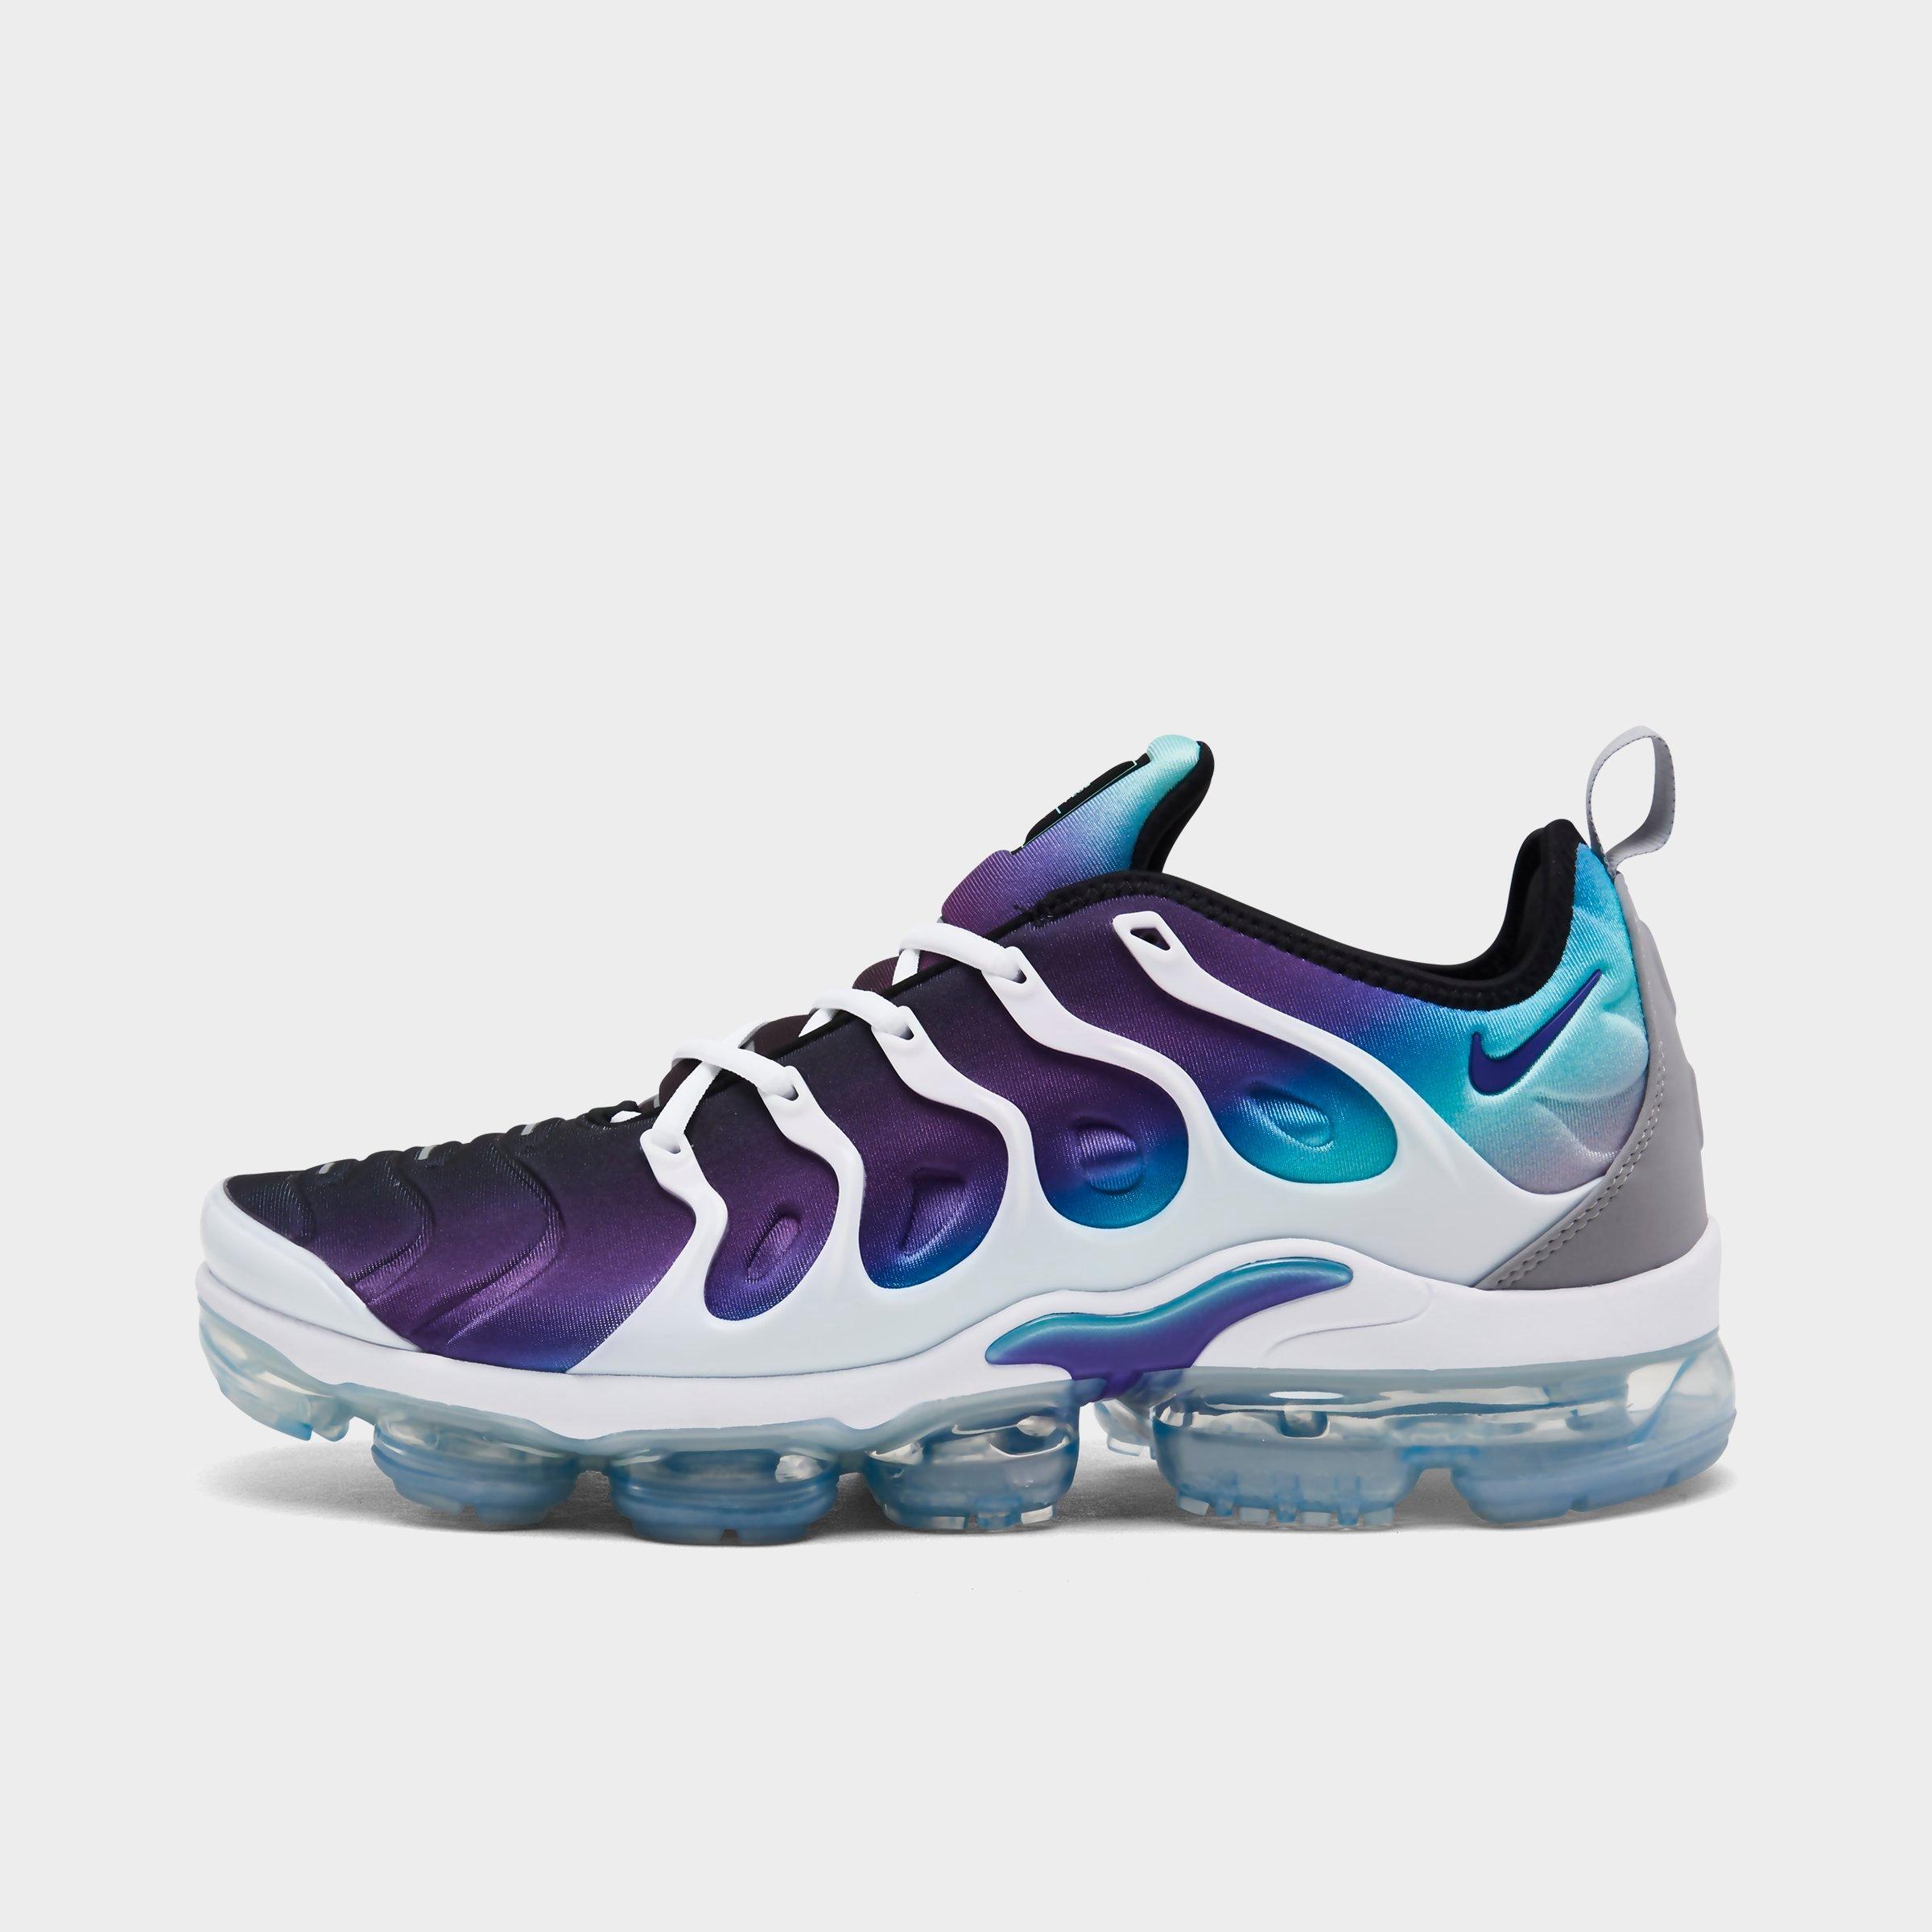 vapormax teal and purple